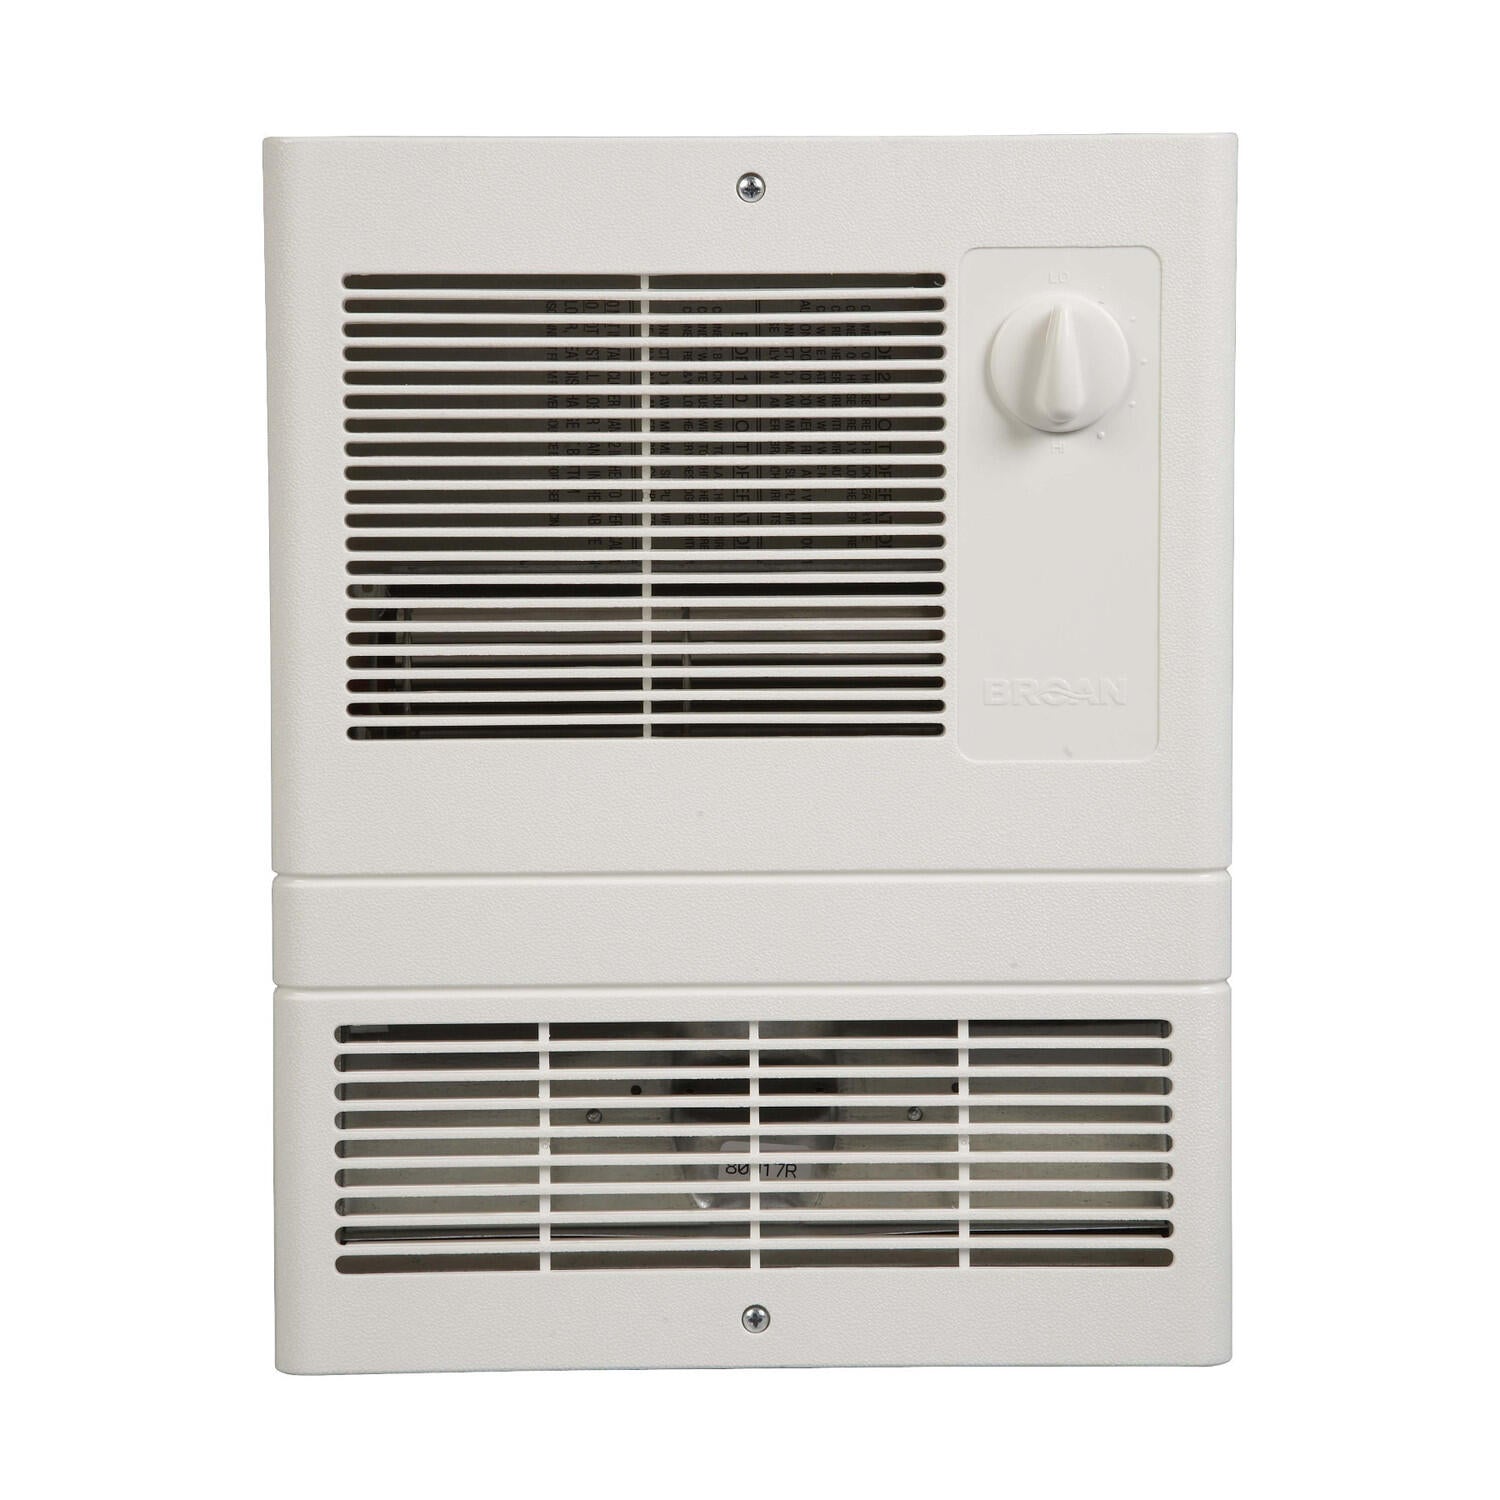 Broan 9810WH Broan® Wall Heater, High-Capacity, 1000W Heater, 120/240V